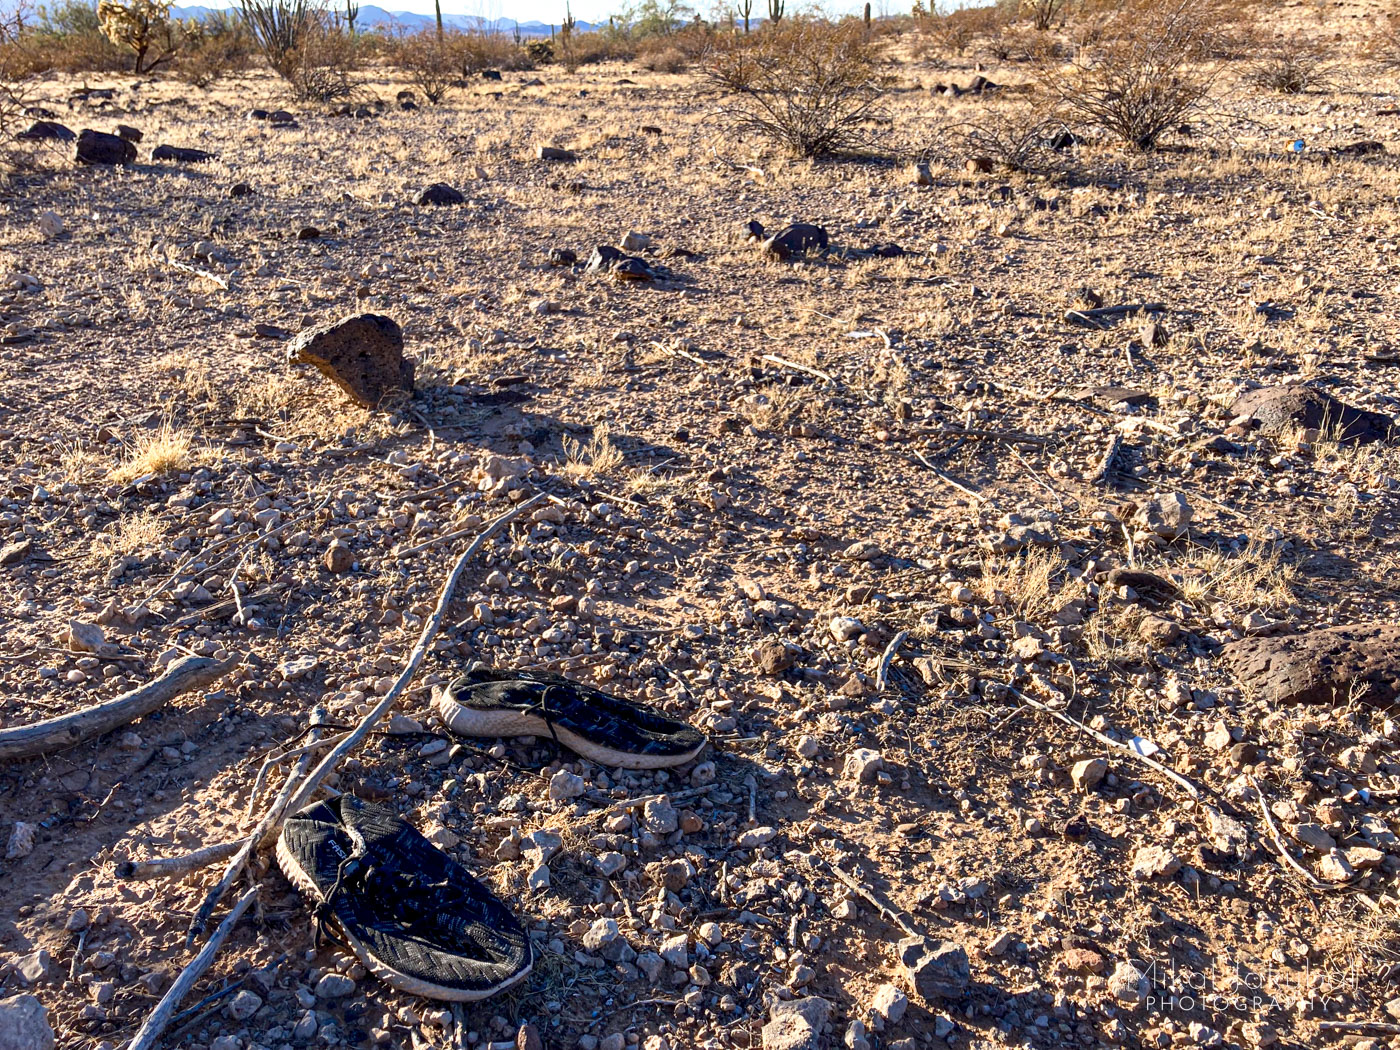 Two small black plaid cloth shoes sit next to each other on rocky soil with a desert landscape in the background. The brand visible in white letters on the outside is "fashion."